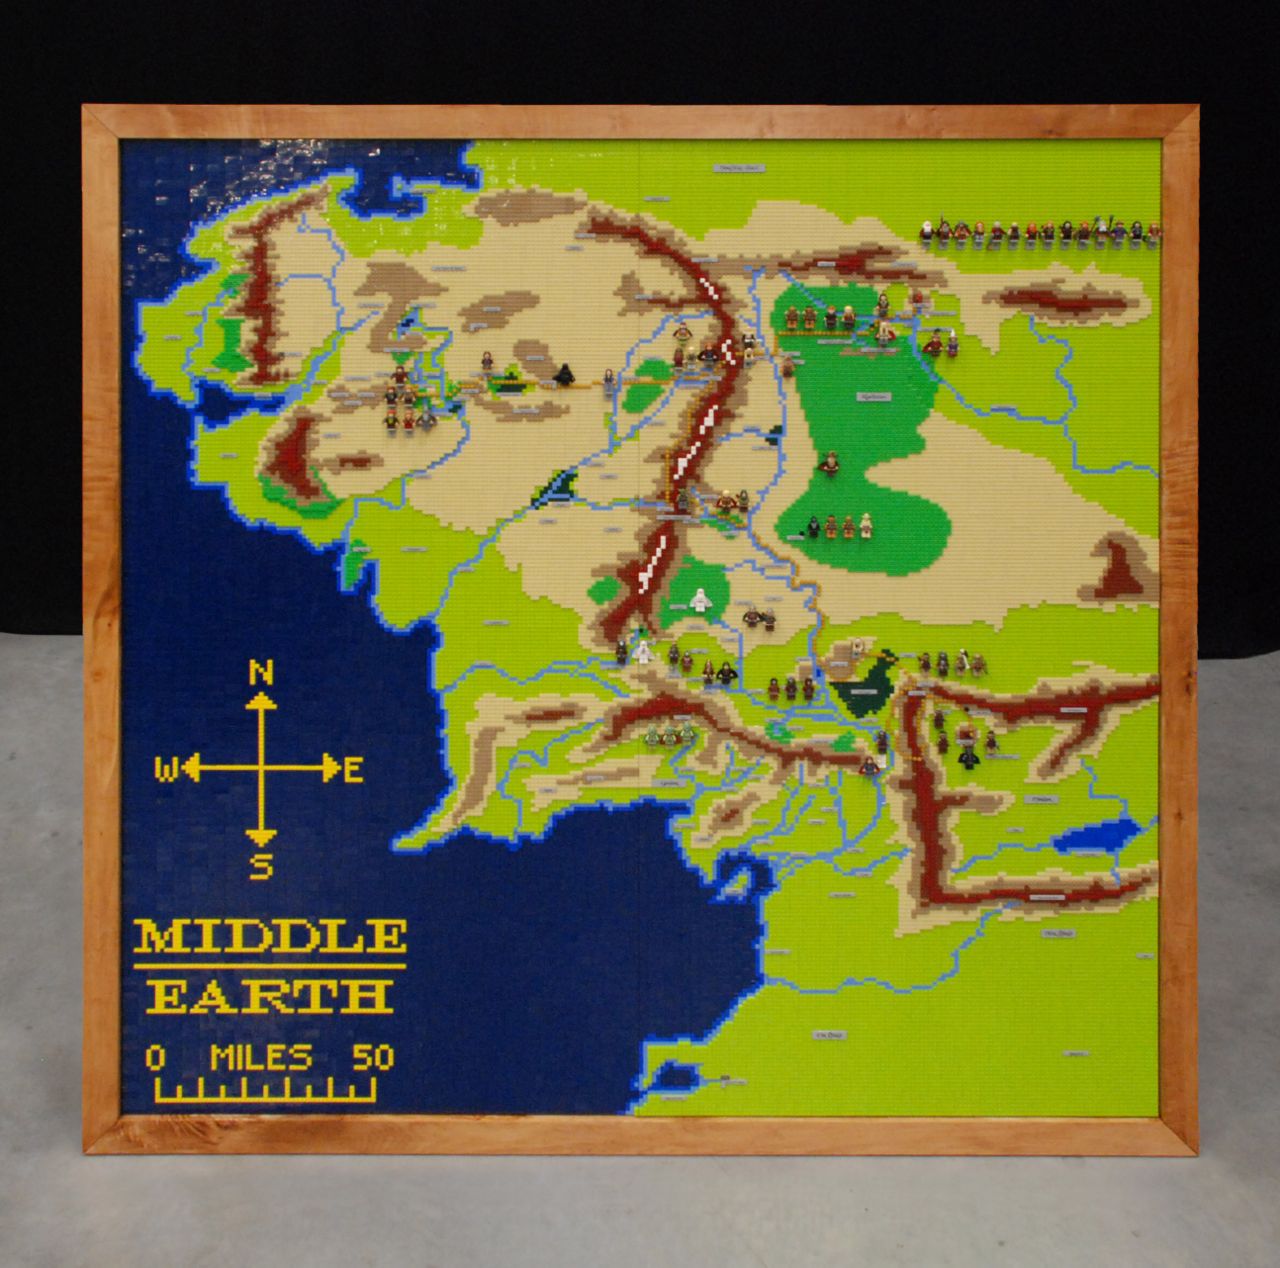 lego lord of the rings map